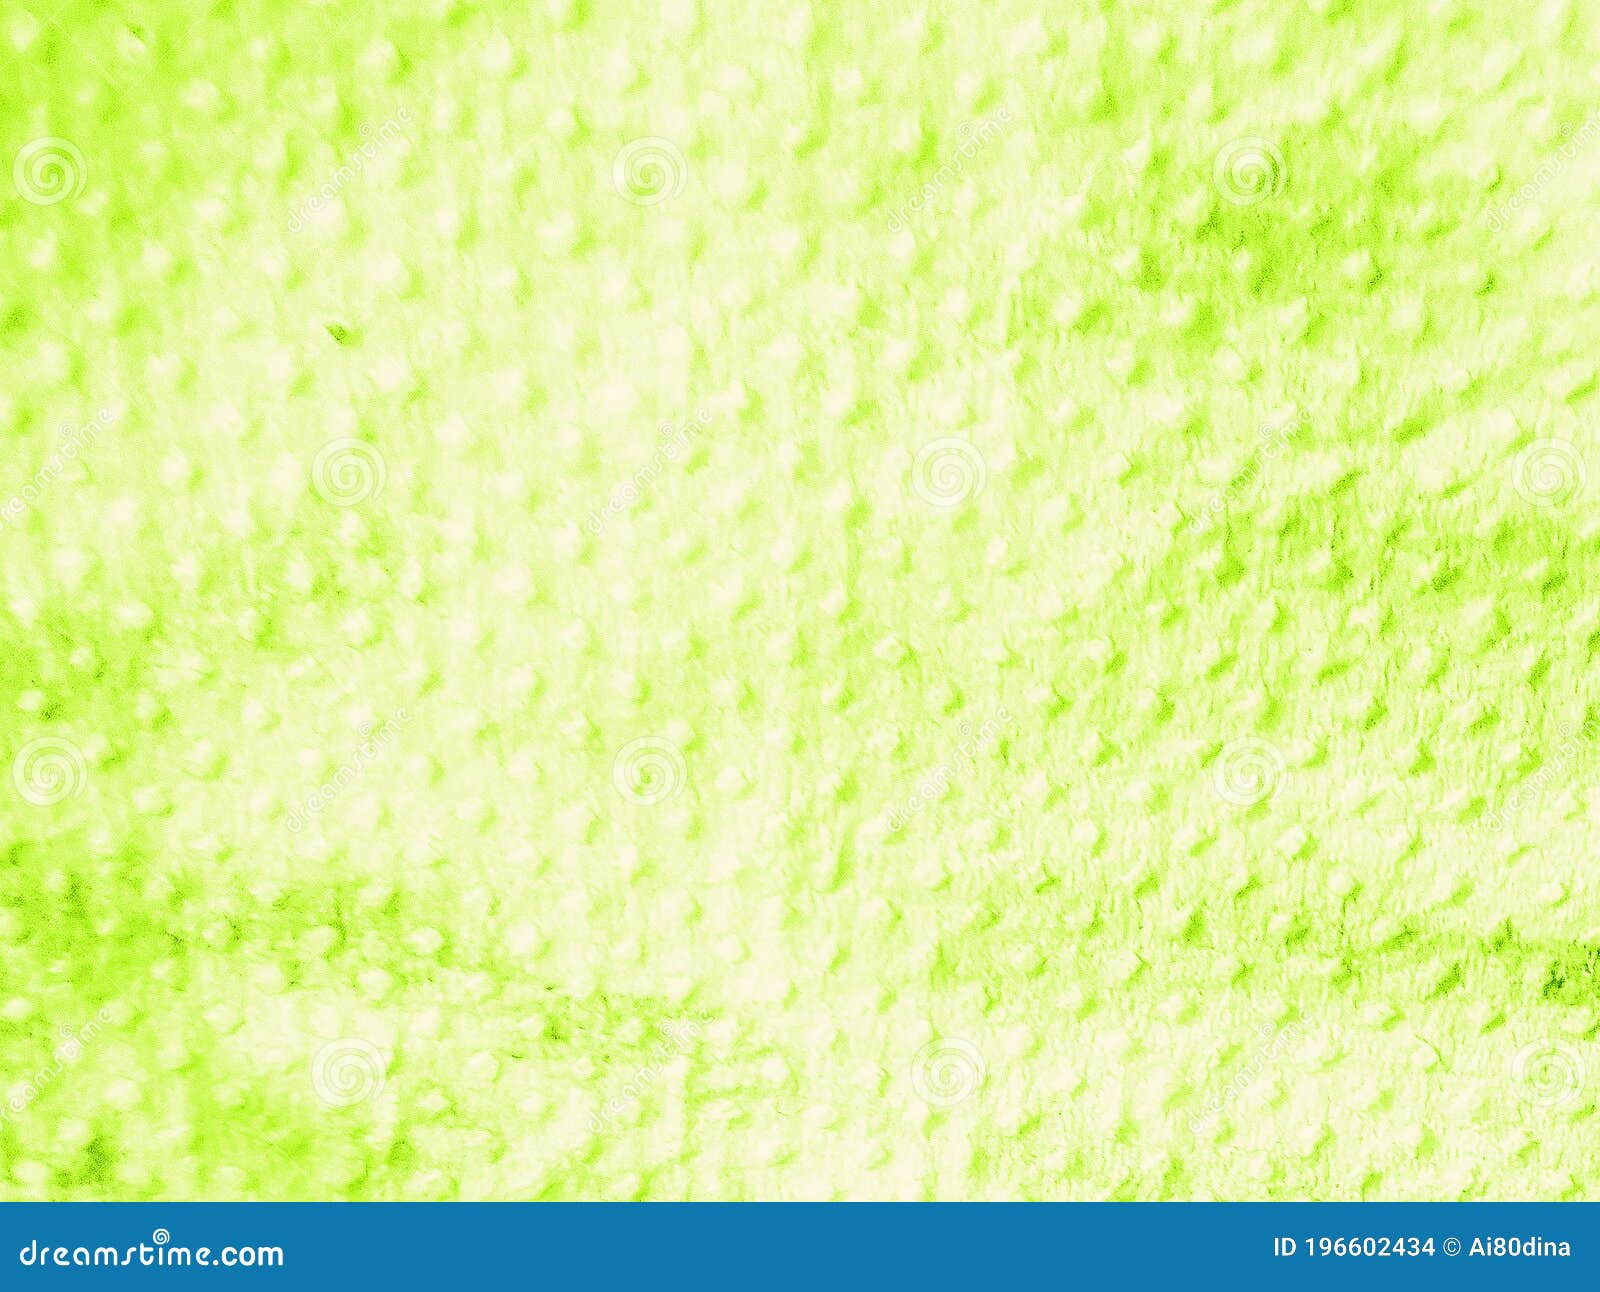 Bright Lime Green Color